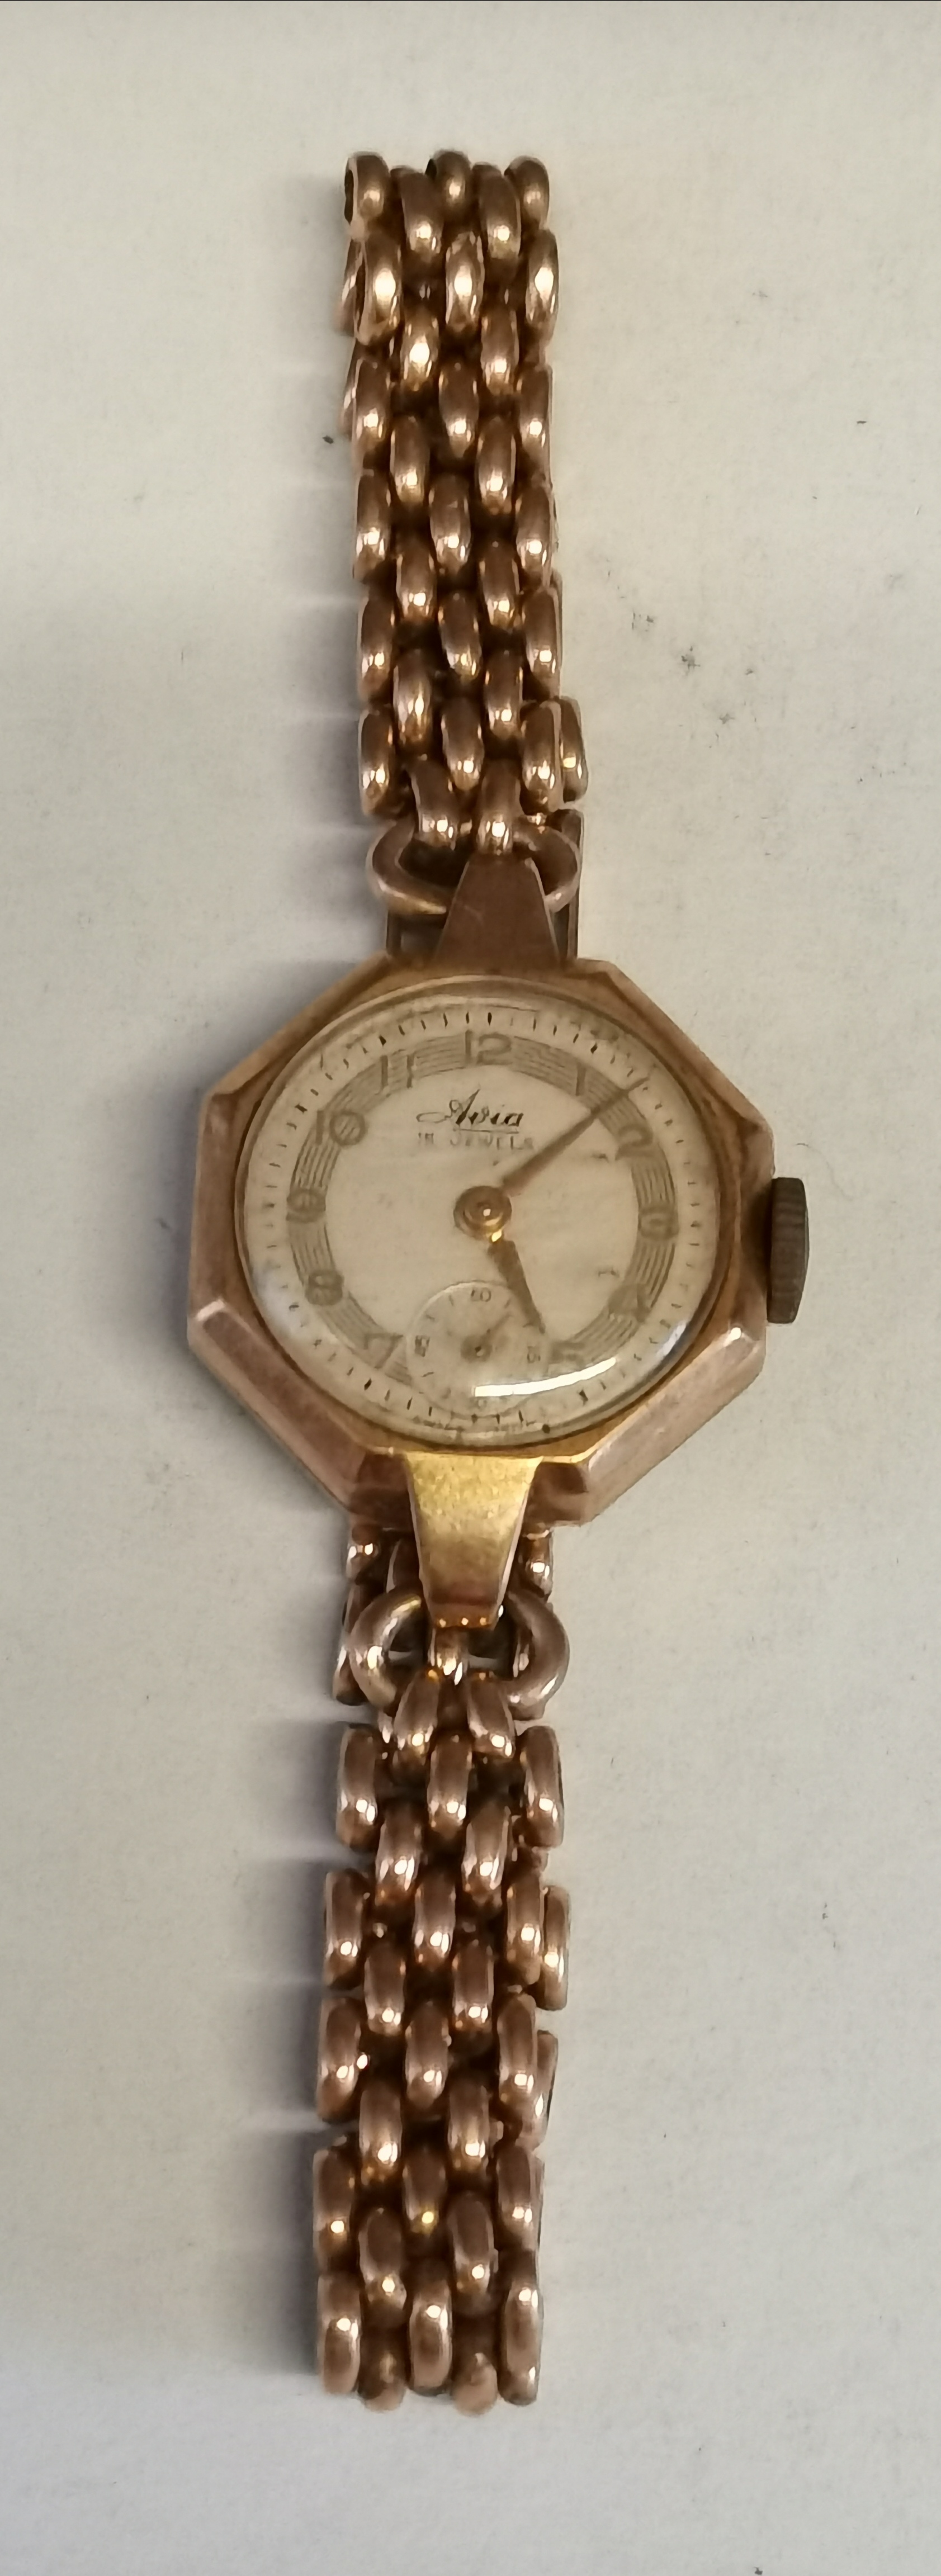 Two 9 carat gold wristwatches - Image 5 of 5